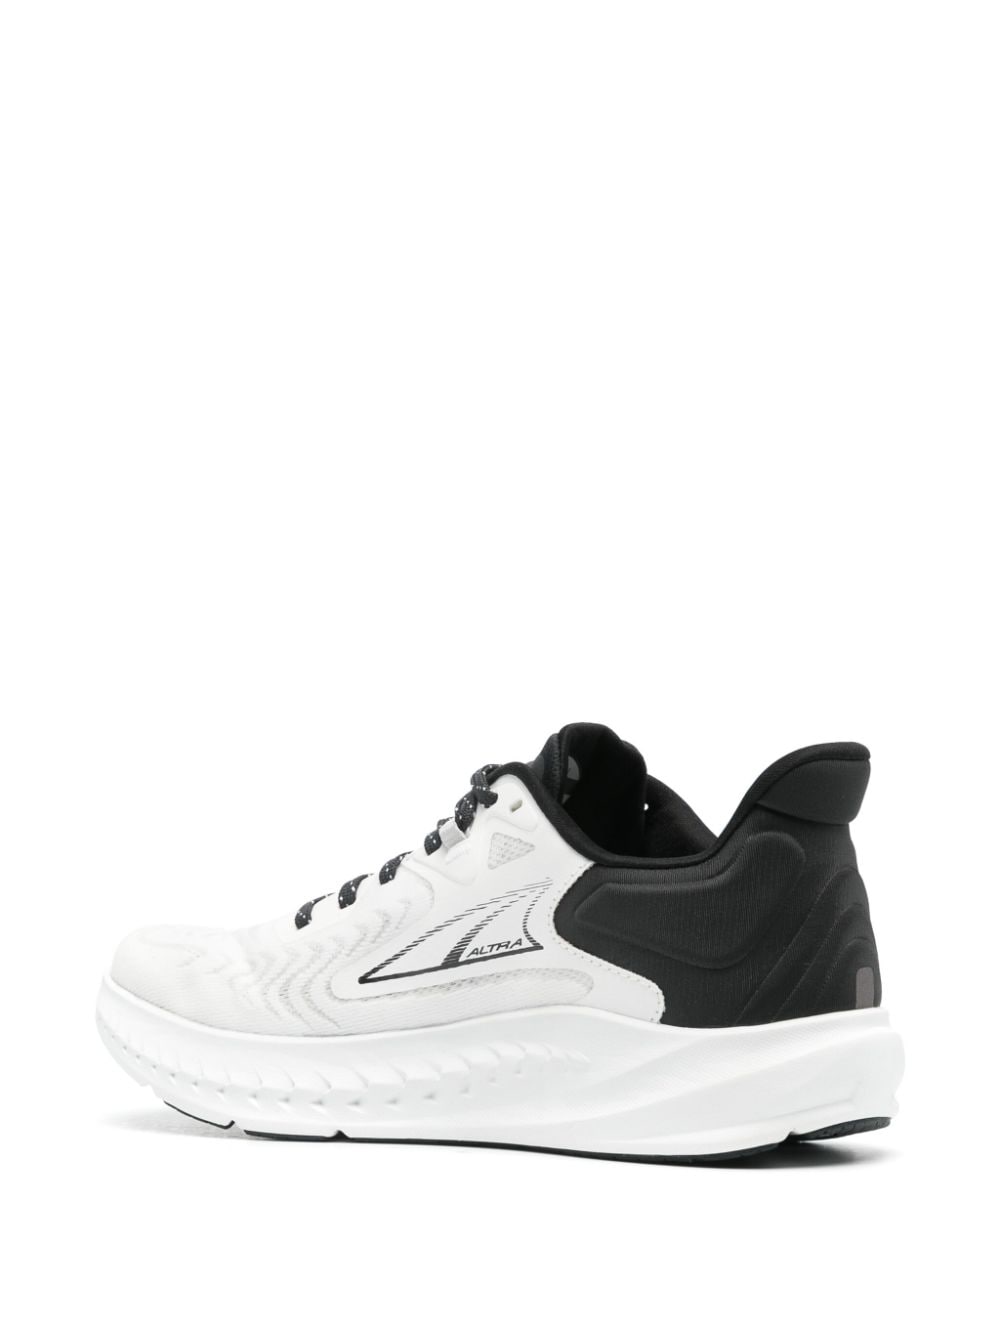 Torin 7 mesh sneakers<BR/><BR/><BR/>